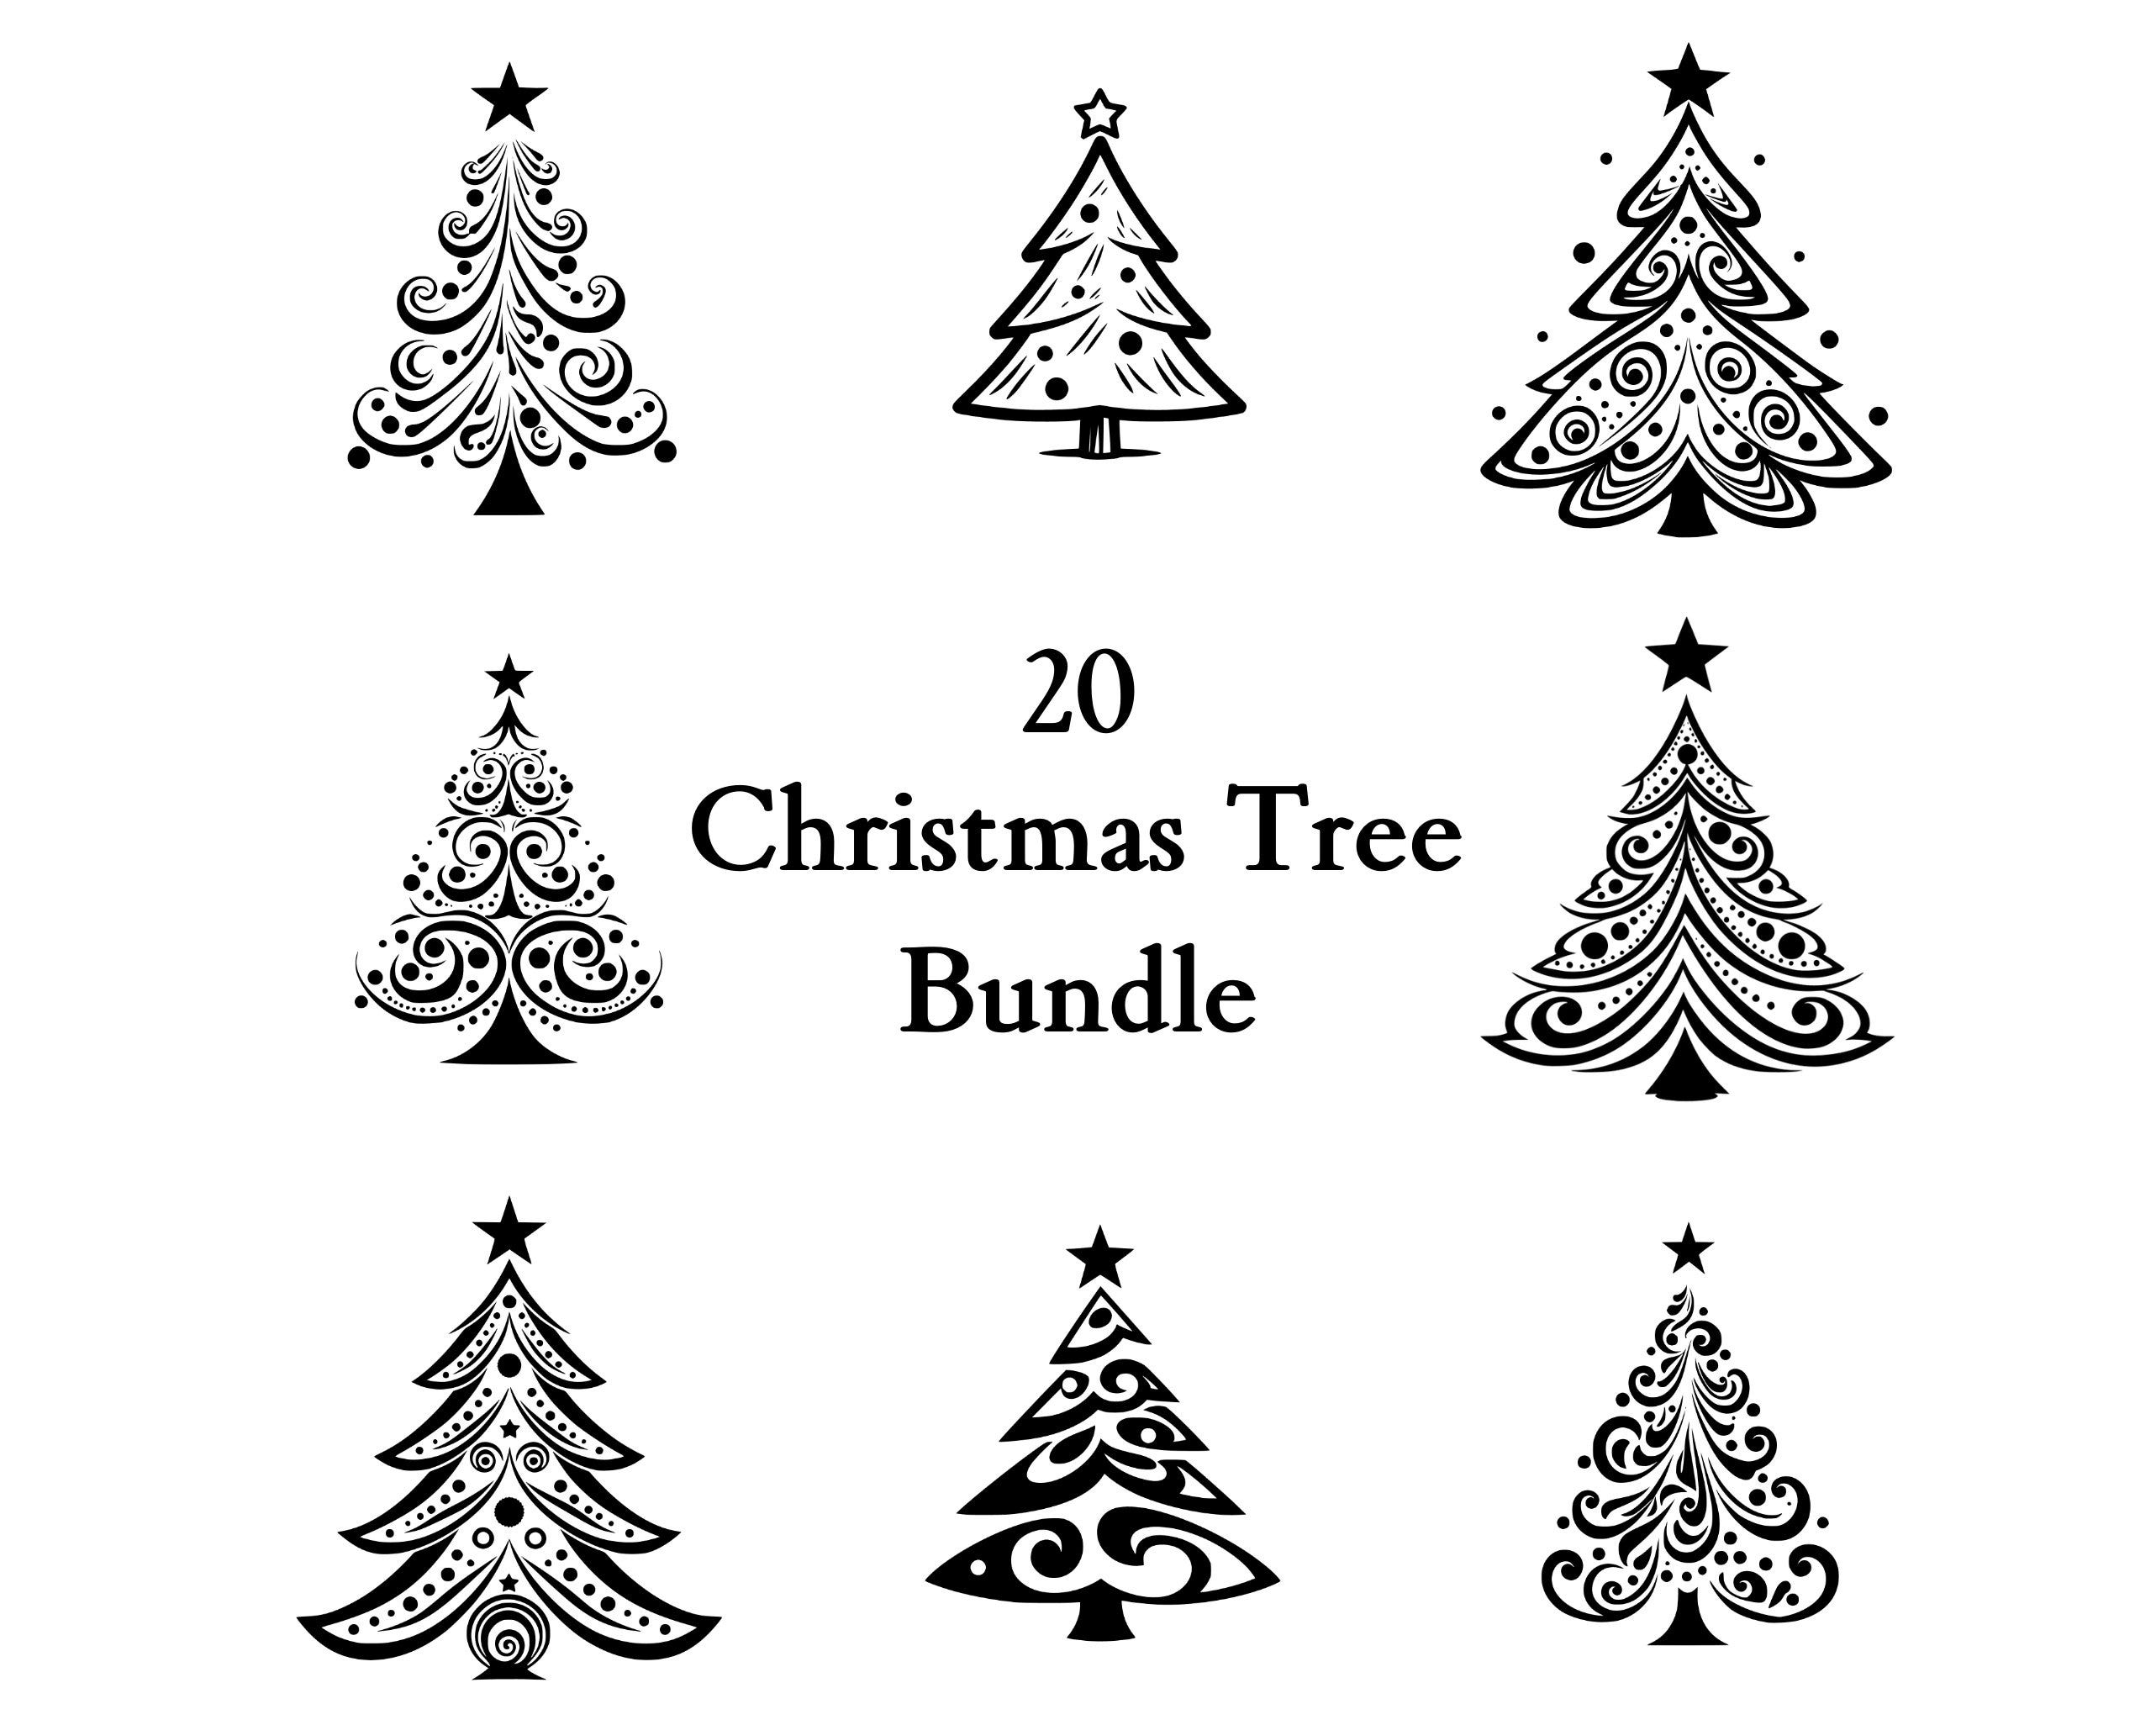 Christmas Tree Svg Bundle , Christmas Tree Svg , Cut Files for Cricut And Laser Engraving , 20 Svg, Png, Dxf Files Combined in One Bundle